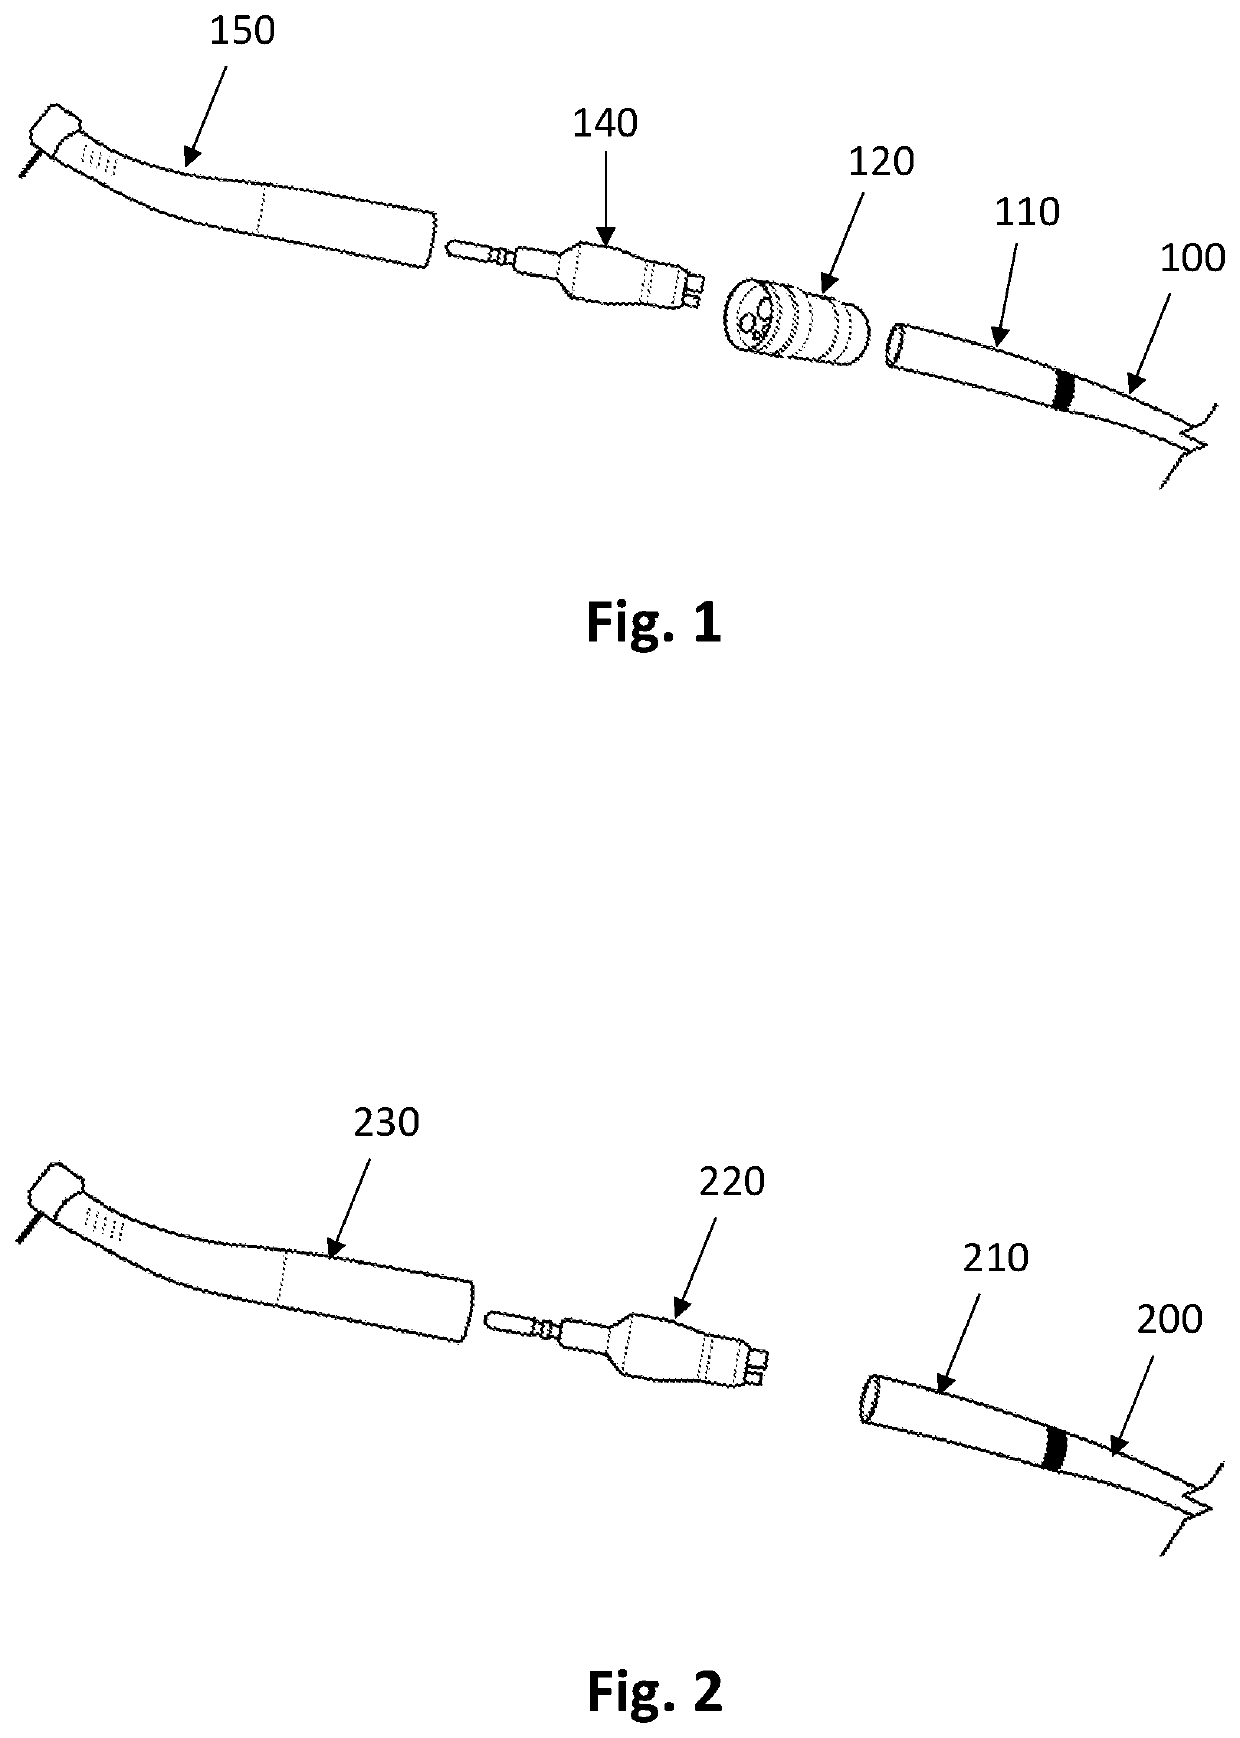 Power generating system for a rotatory dental apparatus